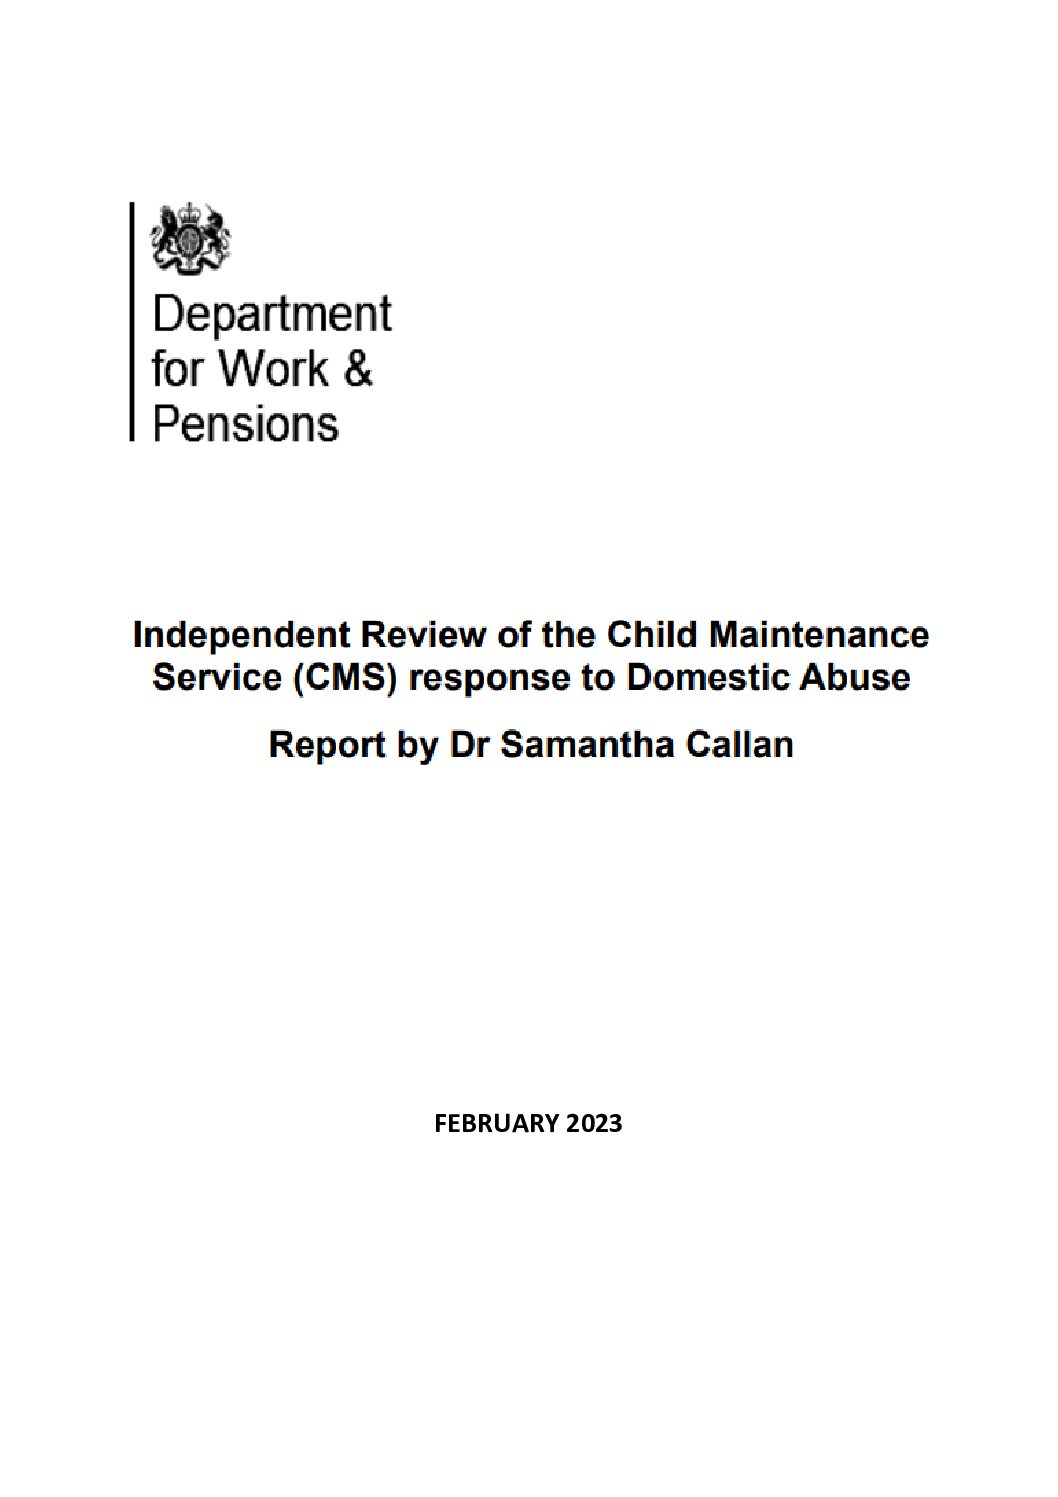 Independent review of the Child Maintenance Service (CMS) response to domestic abuse